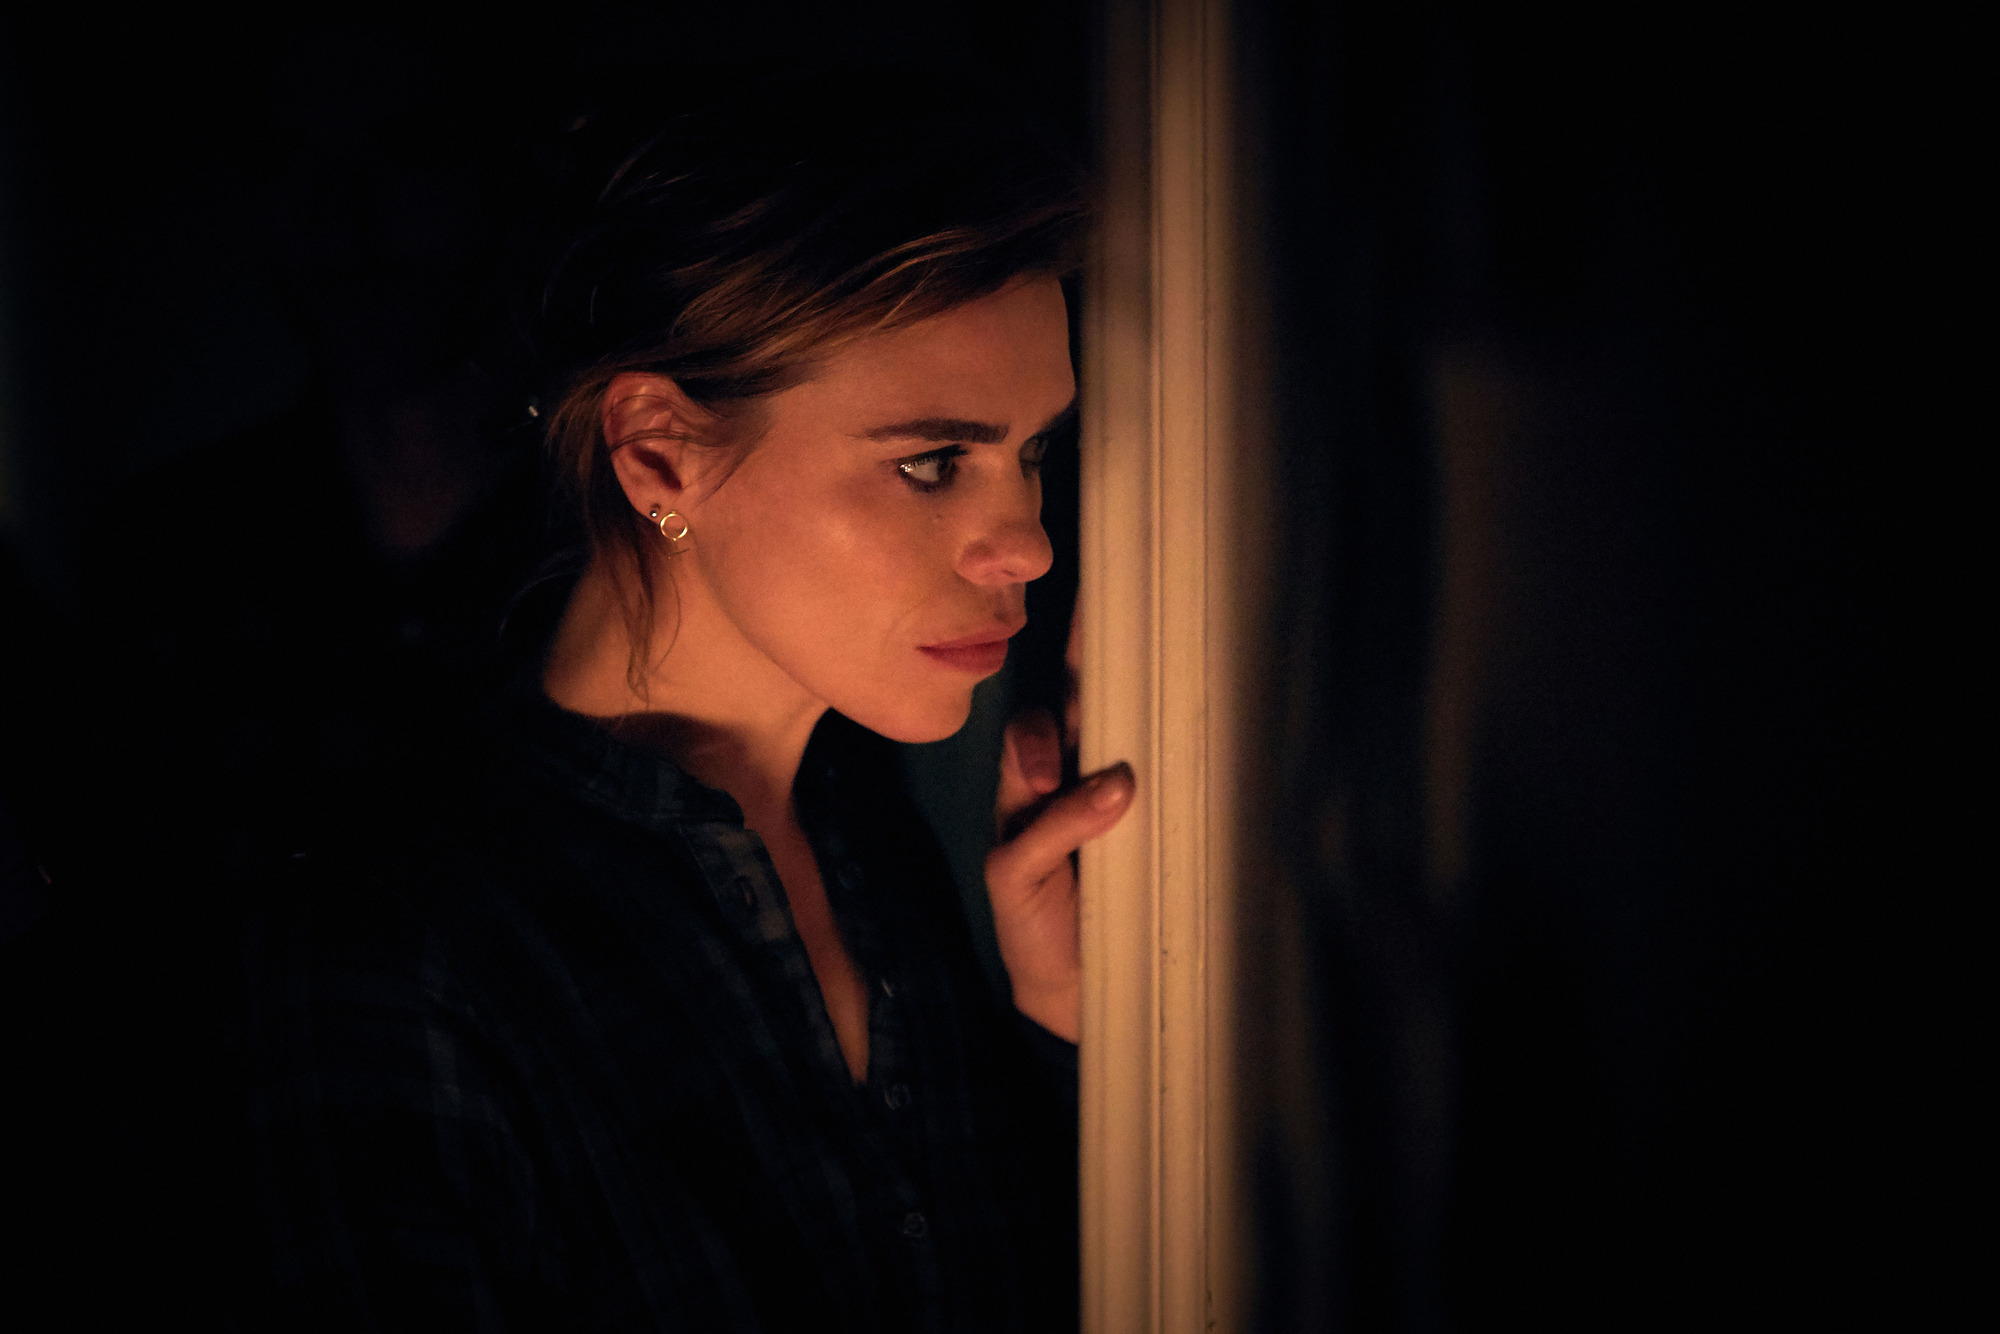 Billie Piper in Collateral (The Forge/Robert Viglasky)